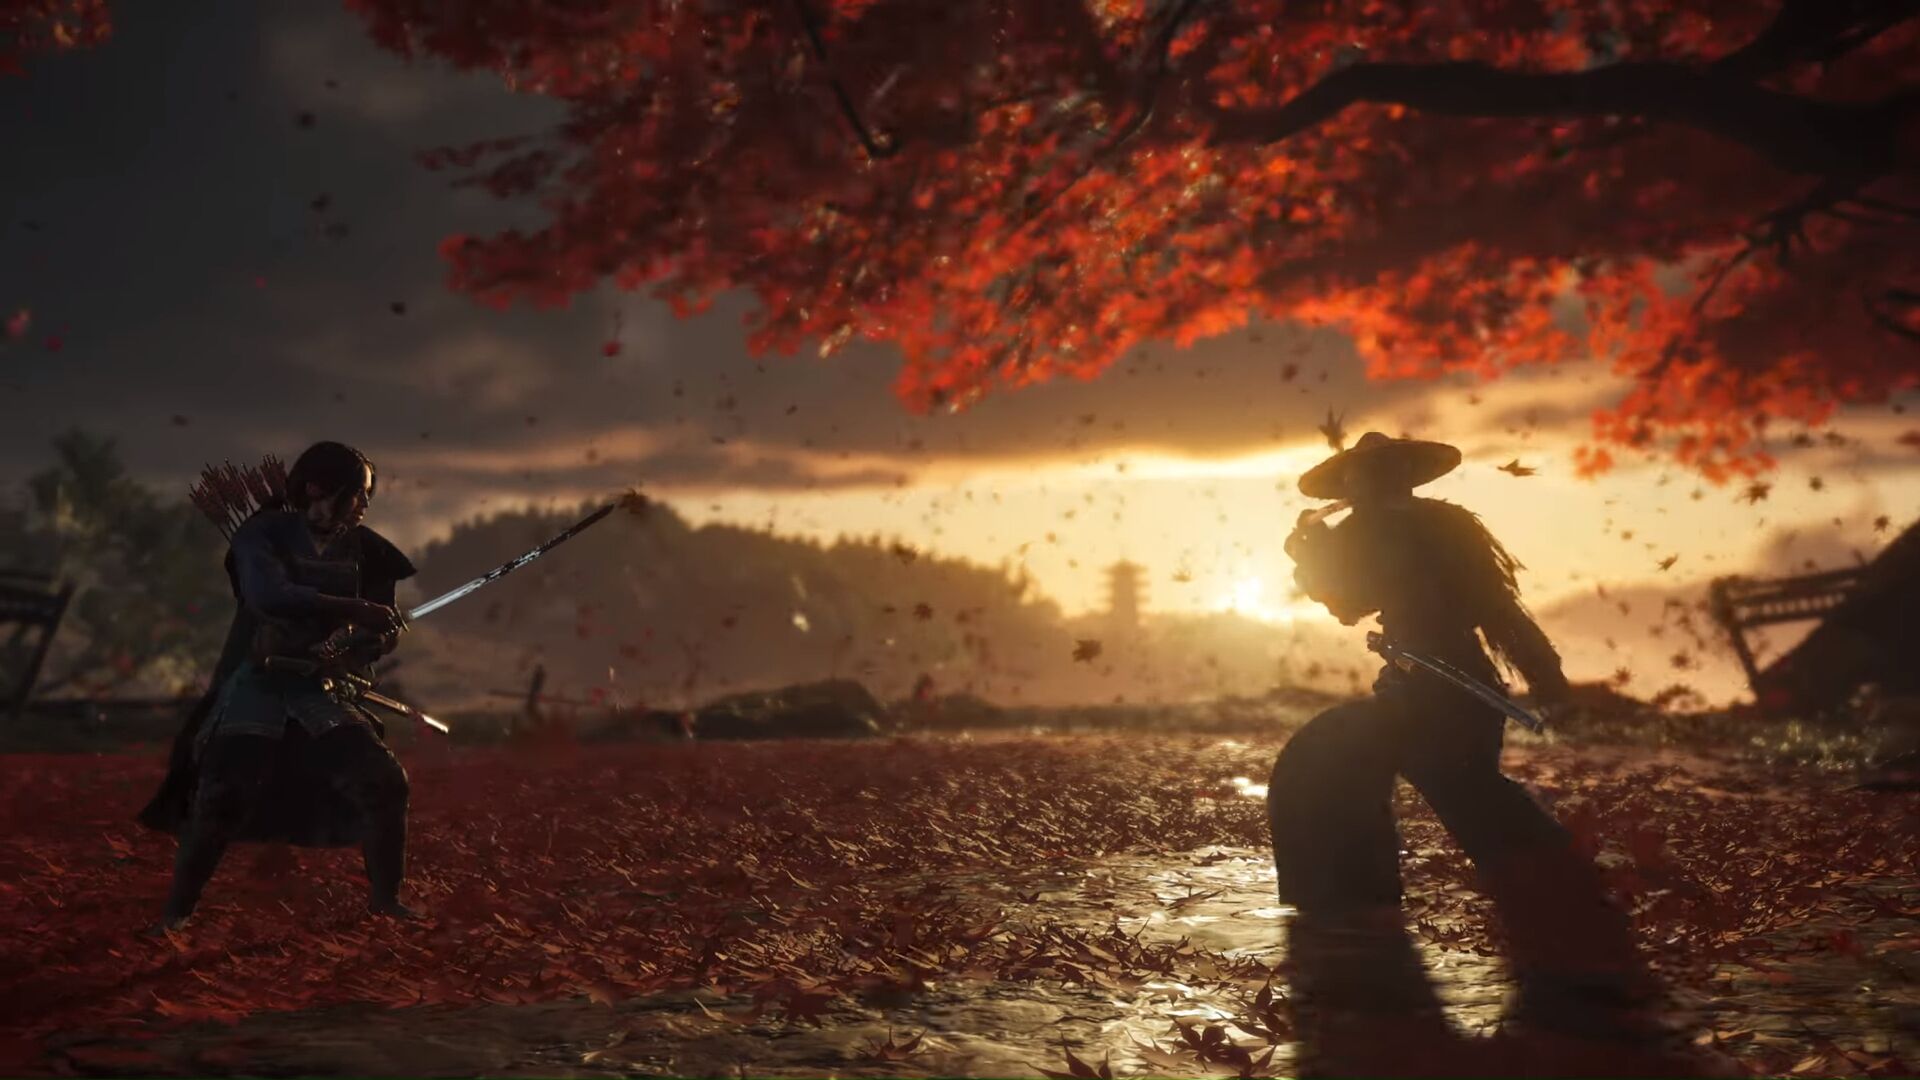 Ghost Of Tsushima 2 seemingly confirmed in job listings